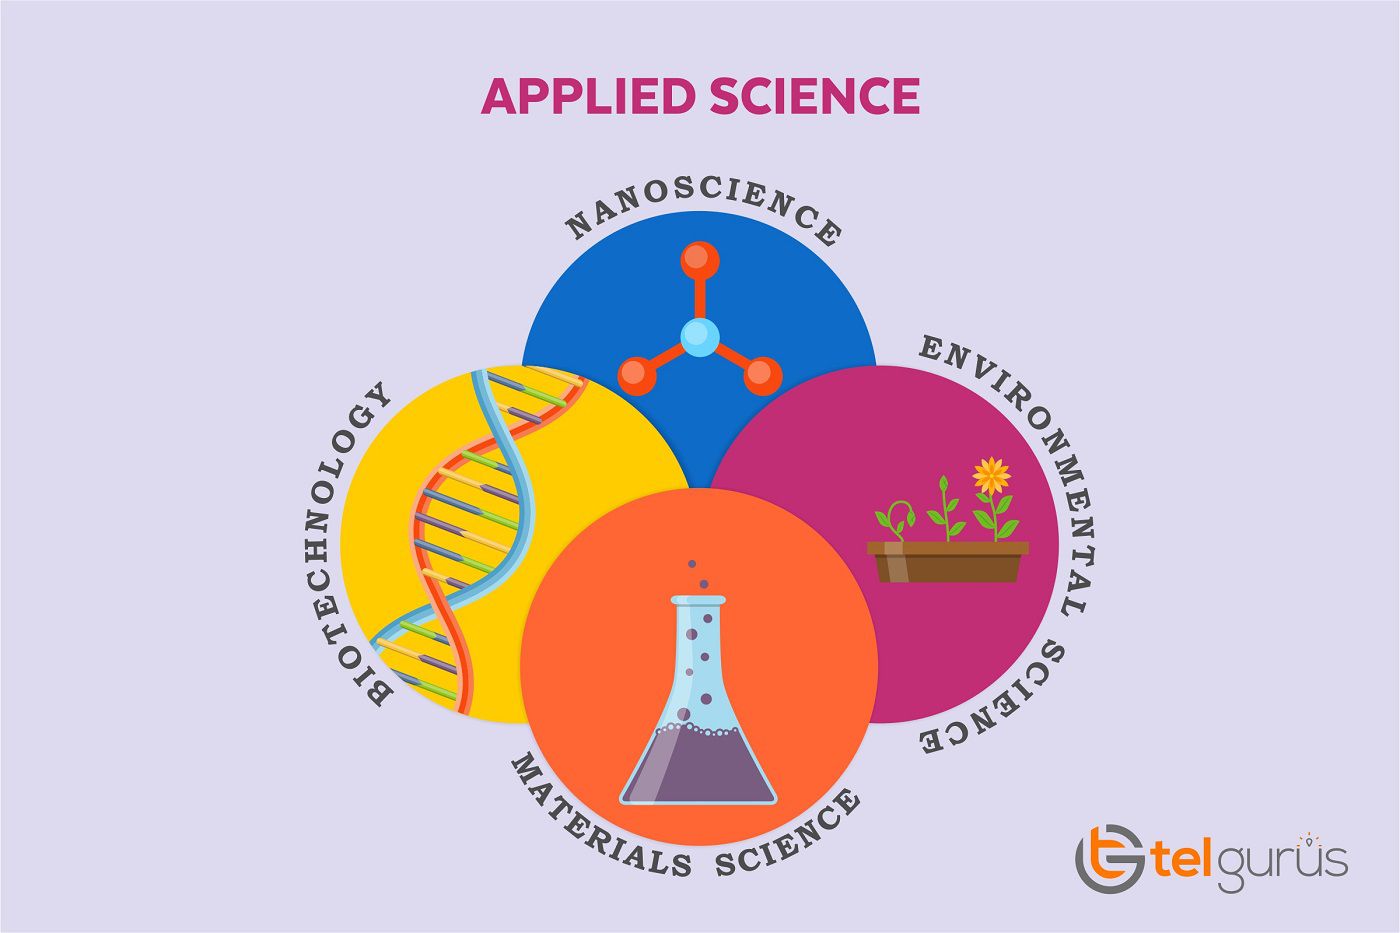 What is applied science?